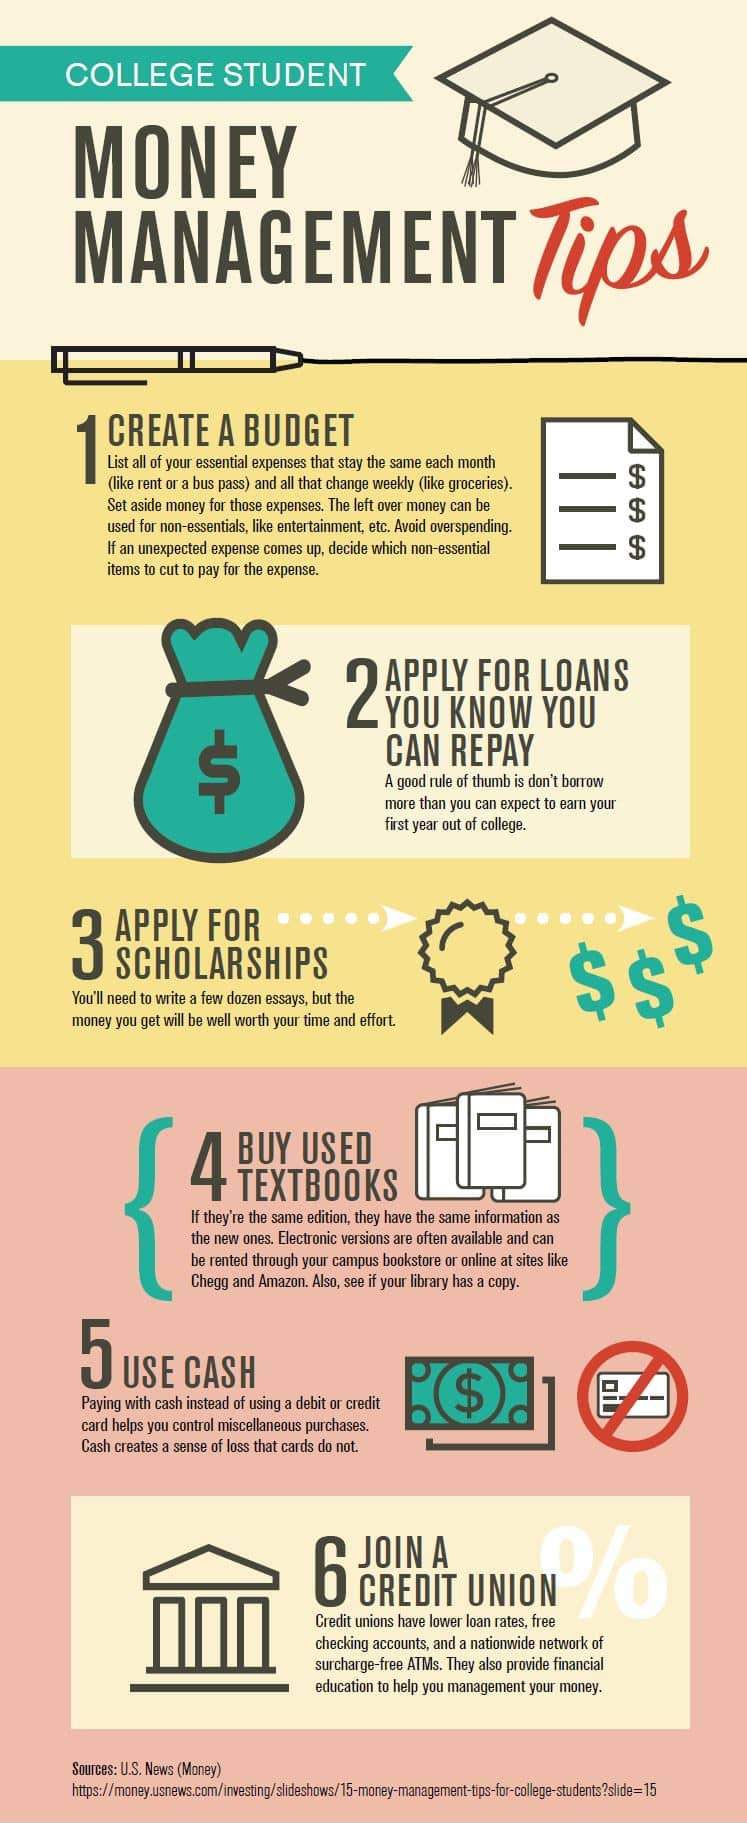 Money Management Tips for College Students - Sooper Credit Union